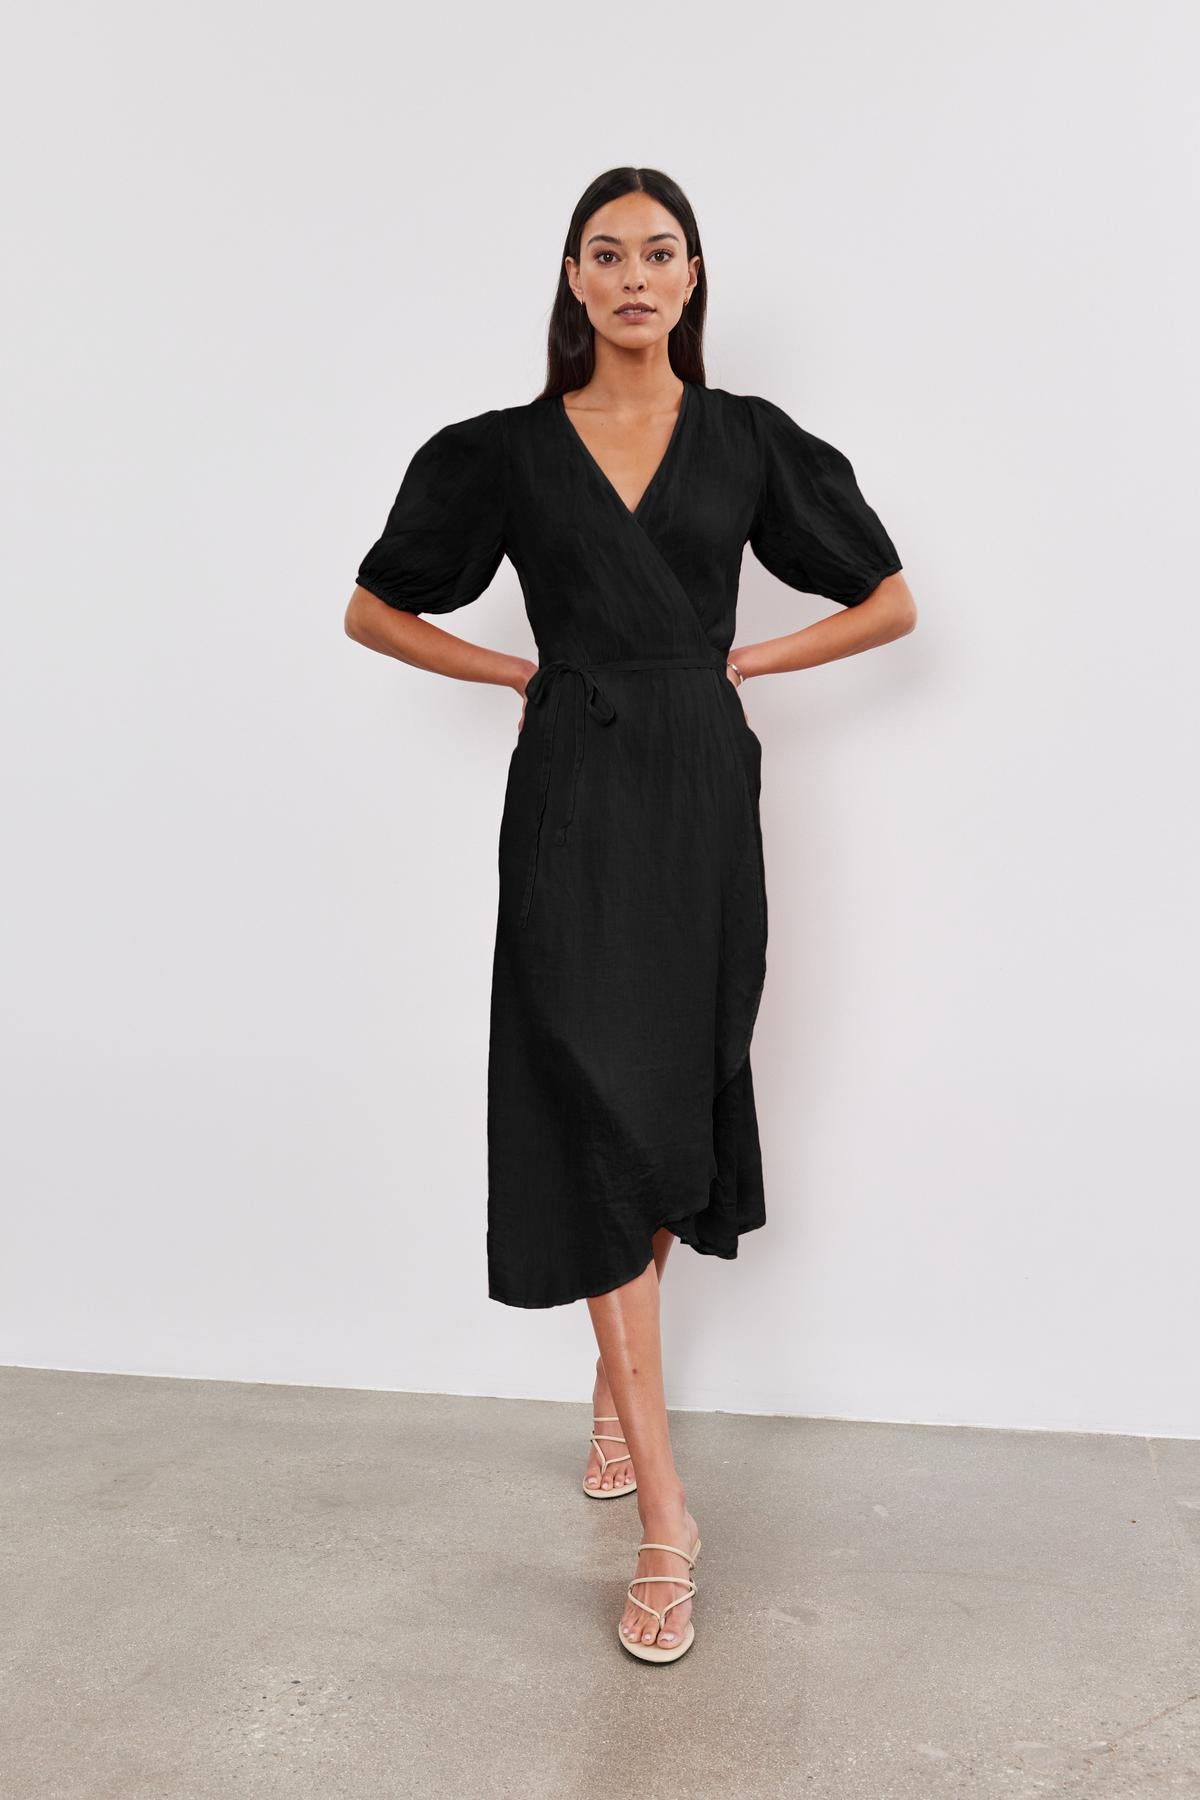 A woman stands against a white background, wearing a black v-neck wrap DALENE LINEN DRESS with short sleeves and a tie waist, paired with light-colored heeled sandals.-36917057978561